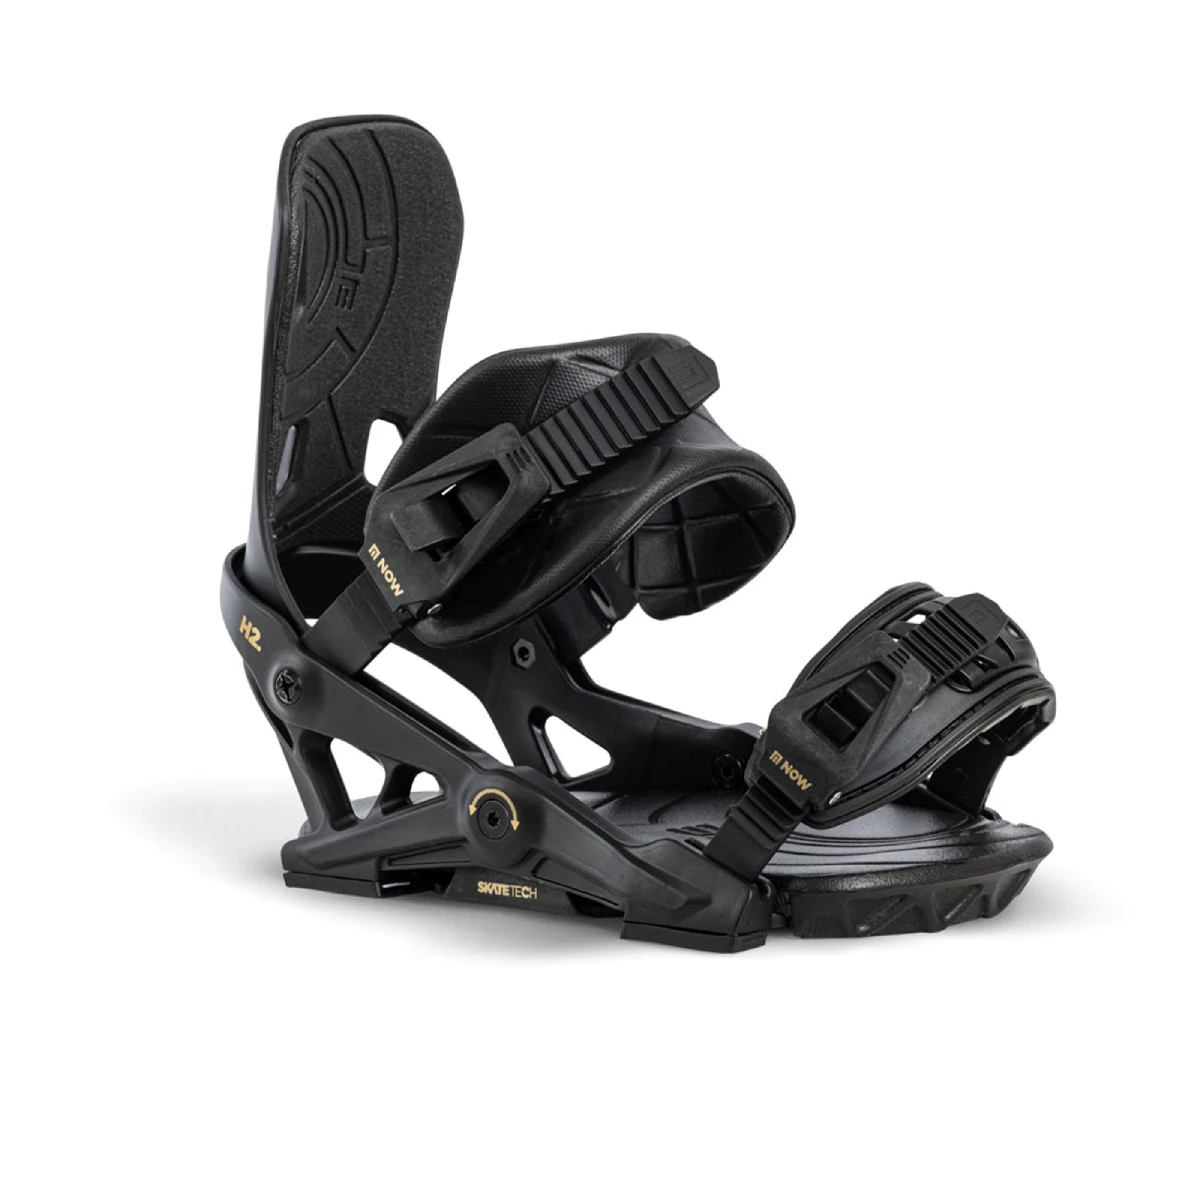 Now BNG IPO snowboard binding